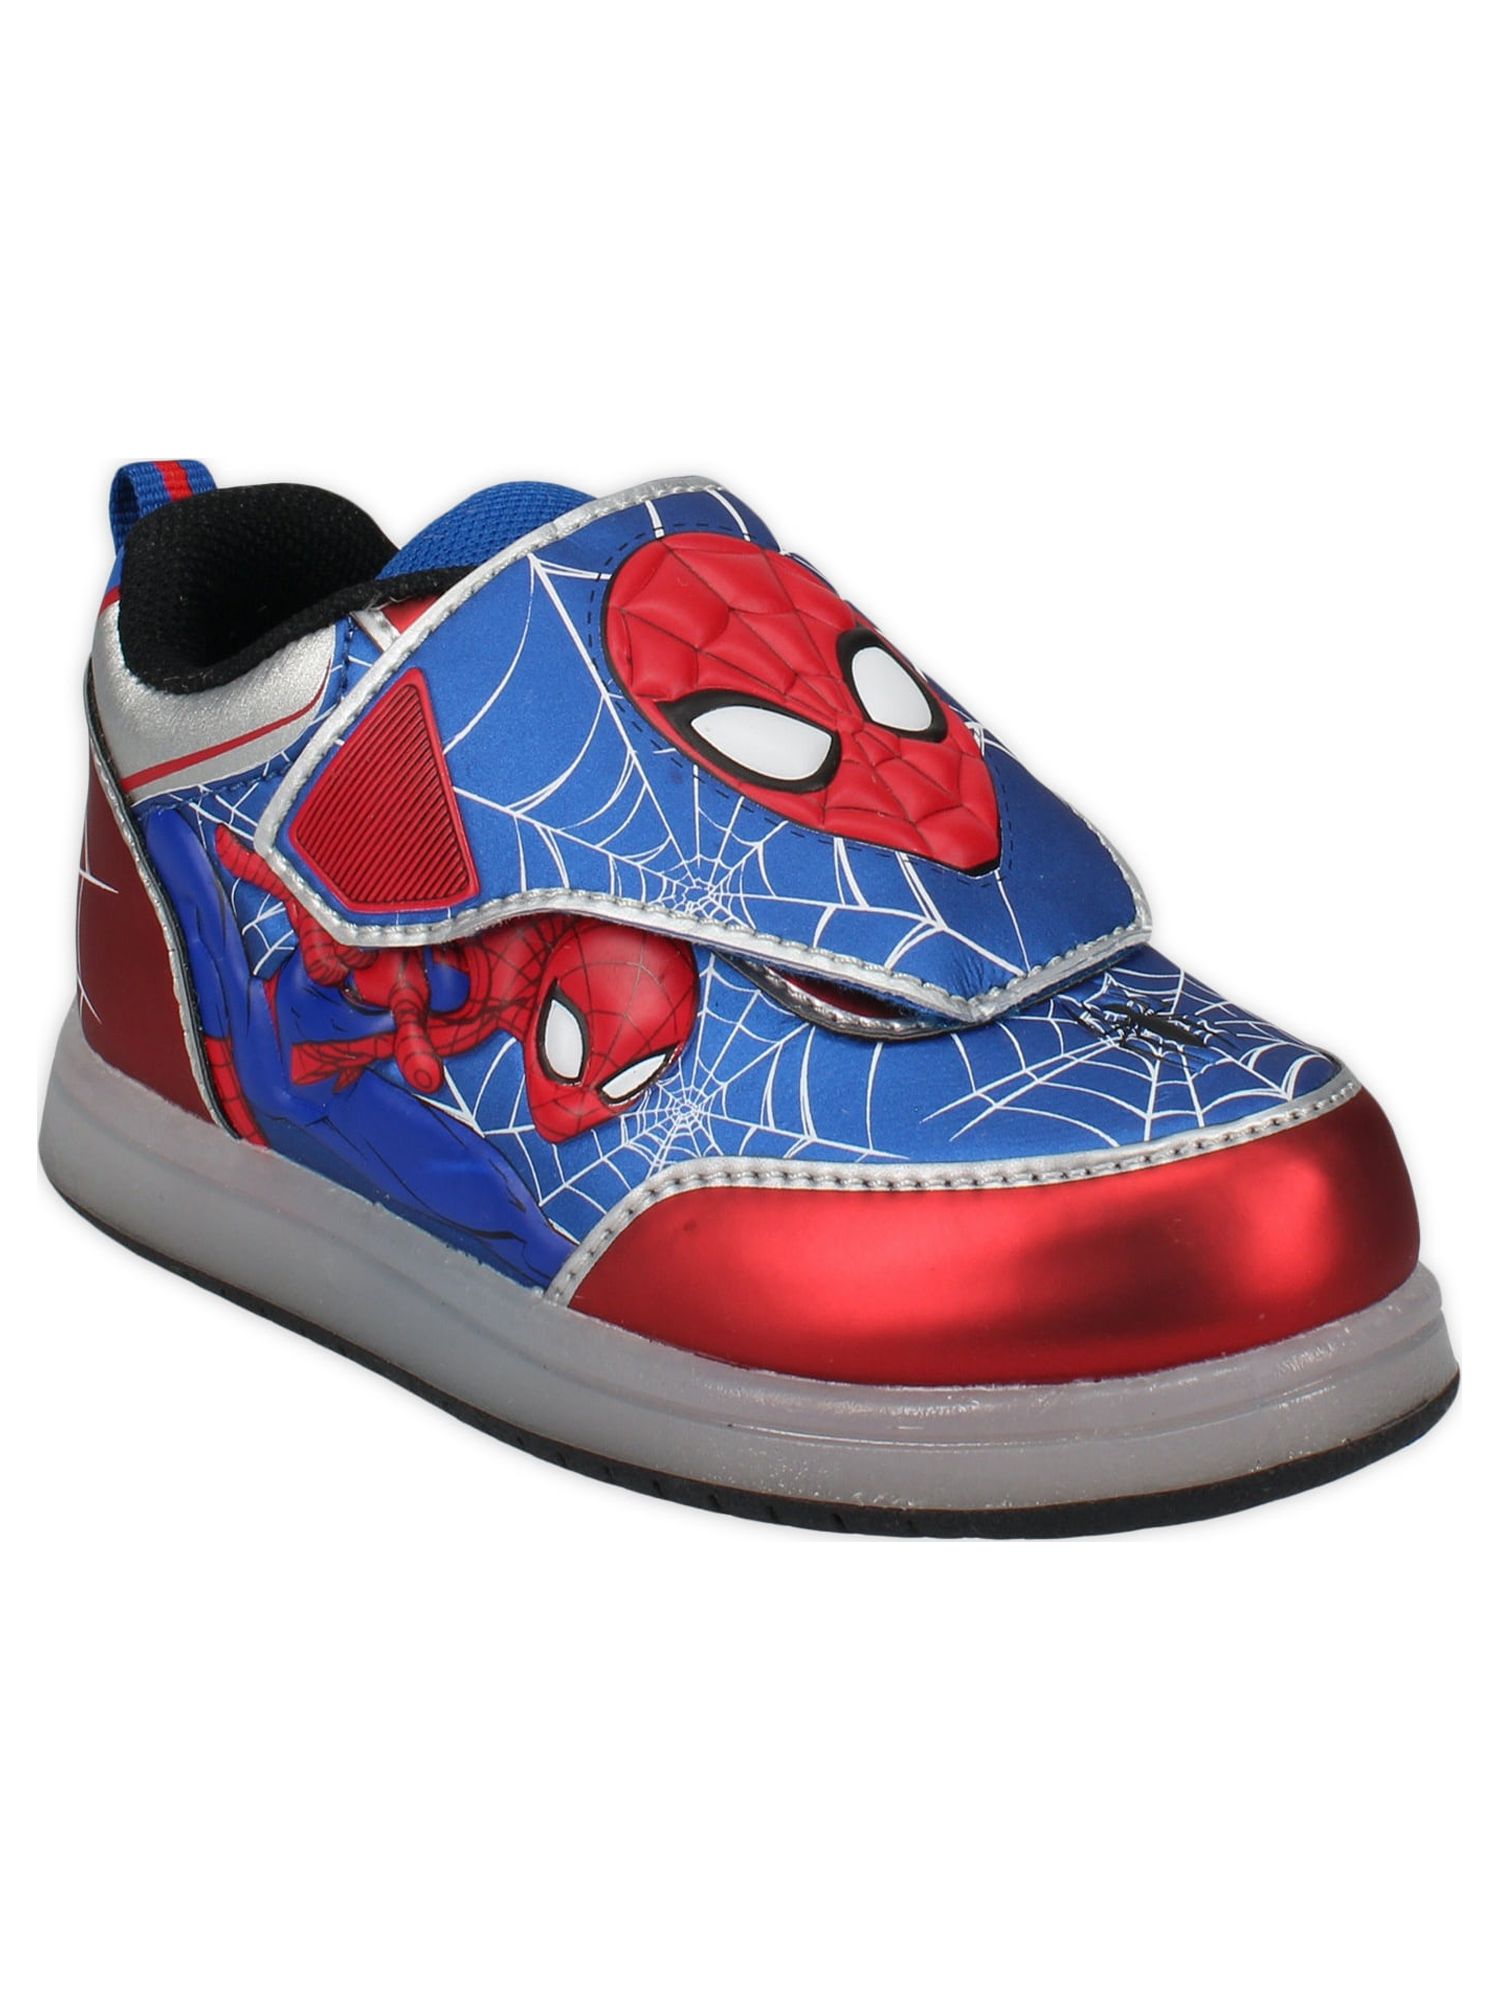 Spider-Man Toddler Boys License Light Up Casual Shoe, Sizes 7-13 - image 1 of 7